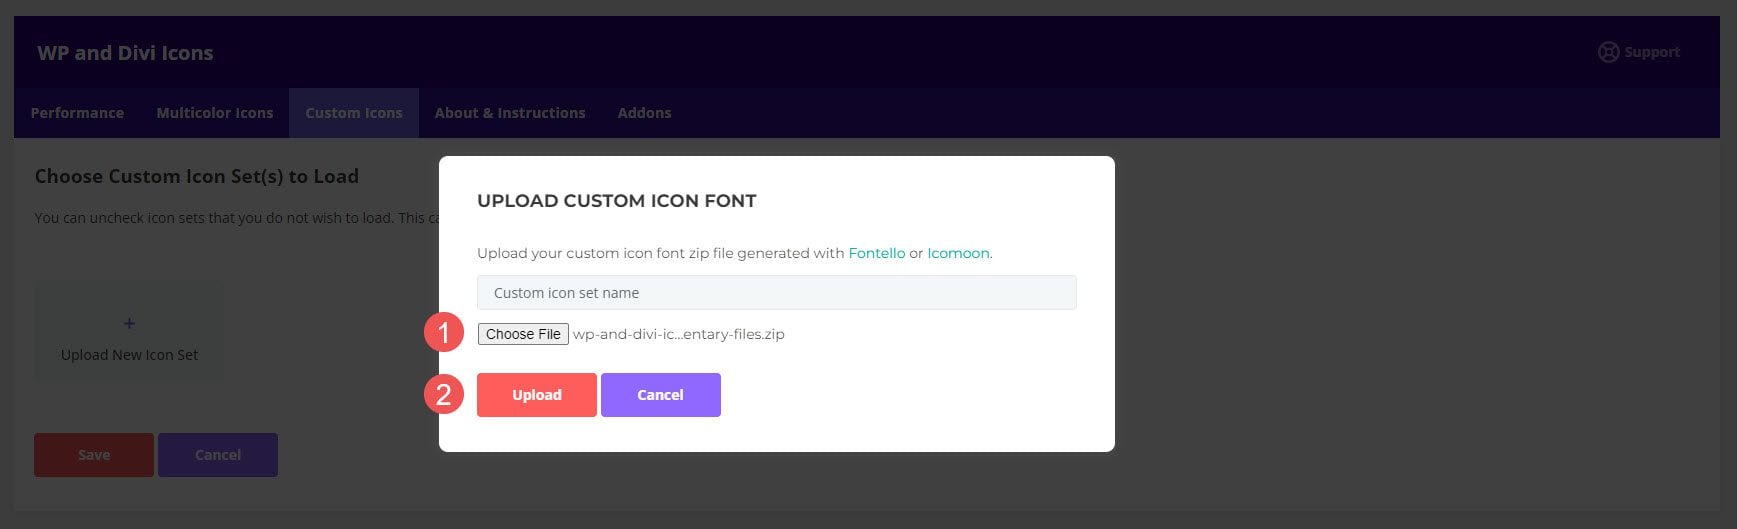 WP and Divi Icons Pro Plugin Settings